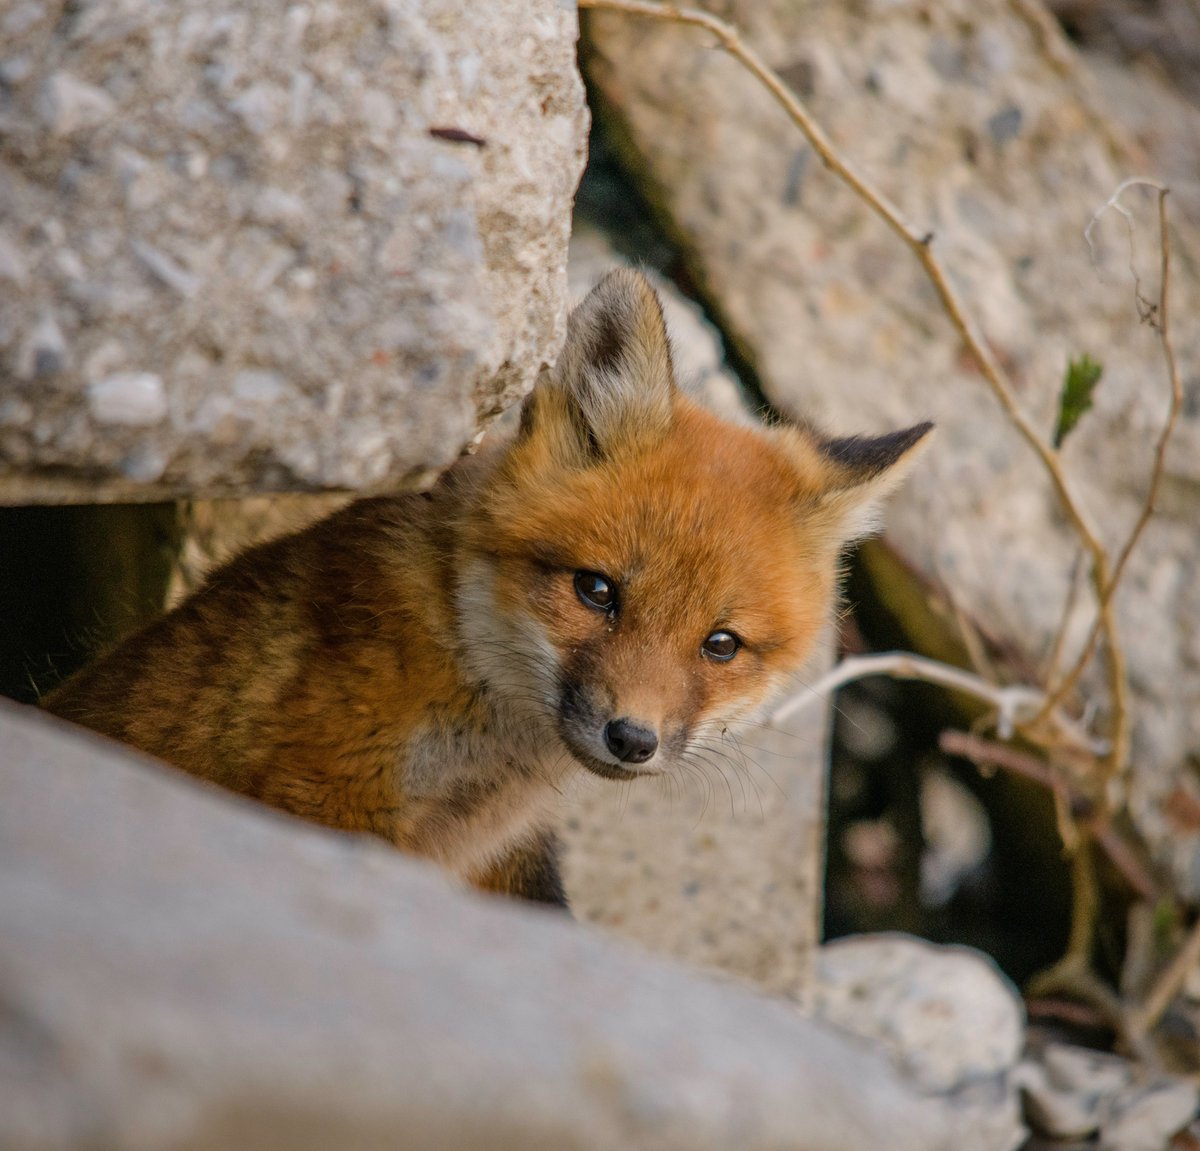 Hunting with Dogs Bill passed: 1 step closer to a fox hunting ban. 🦊

While some of my amendments passed, there's much more to do to stamp out animal cruelty. 

Any evidence that fox hunting is continuing under the new law must be acted on immediately
#FortheFoxes
Photo: J Hynes